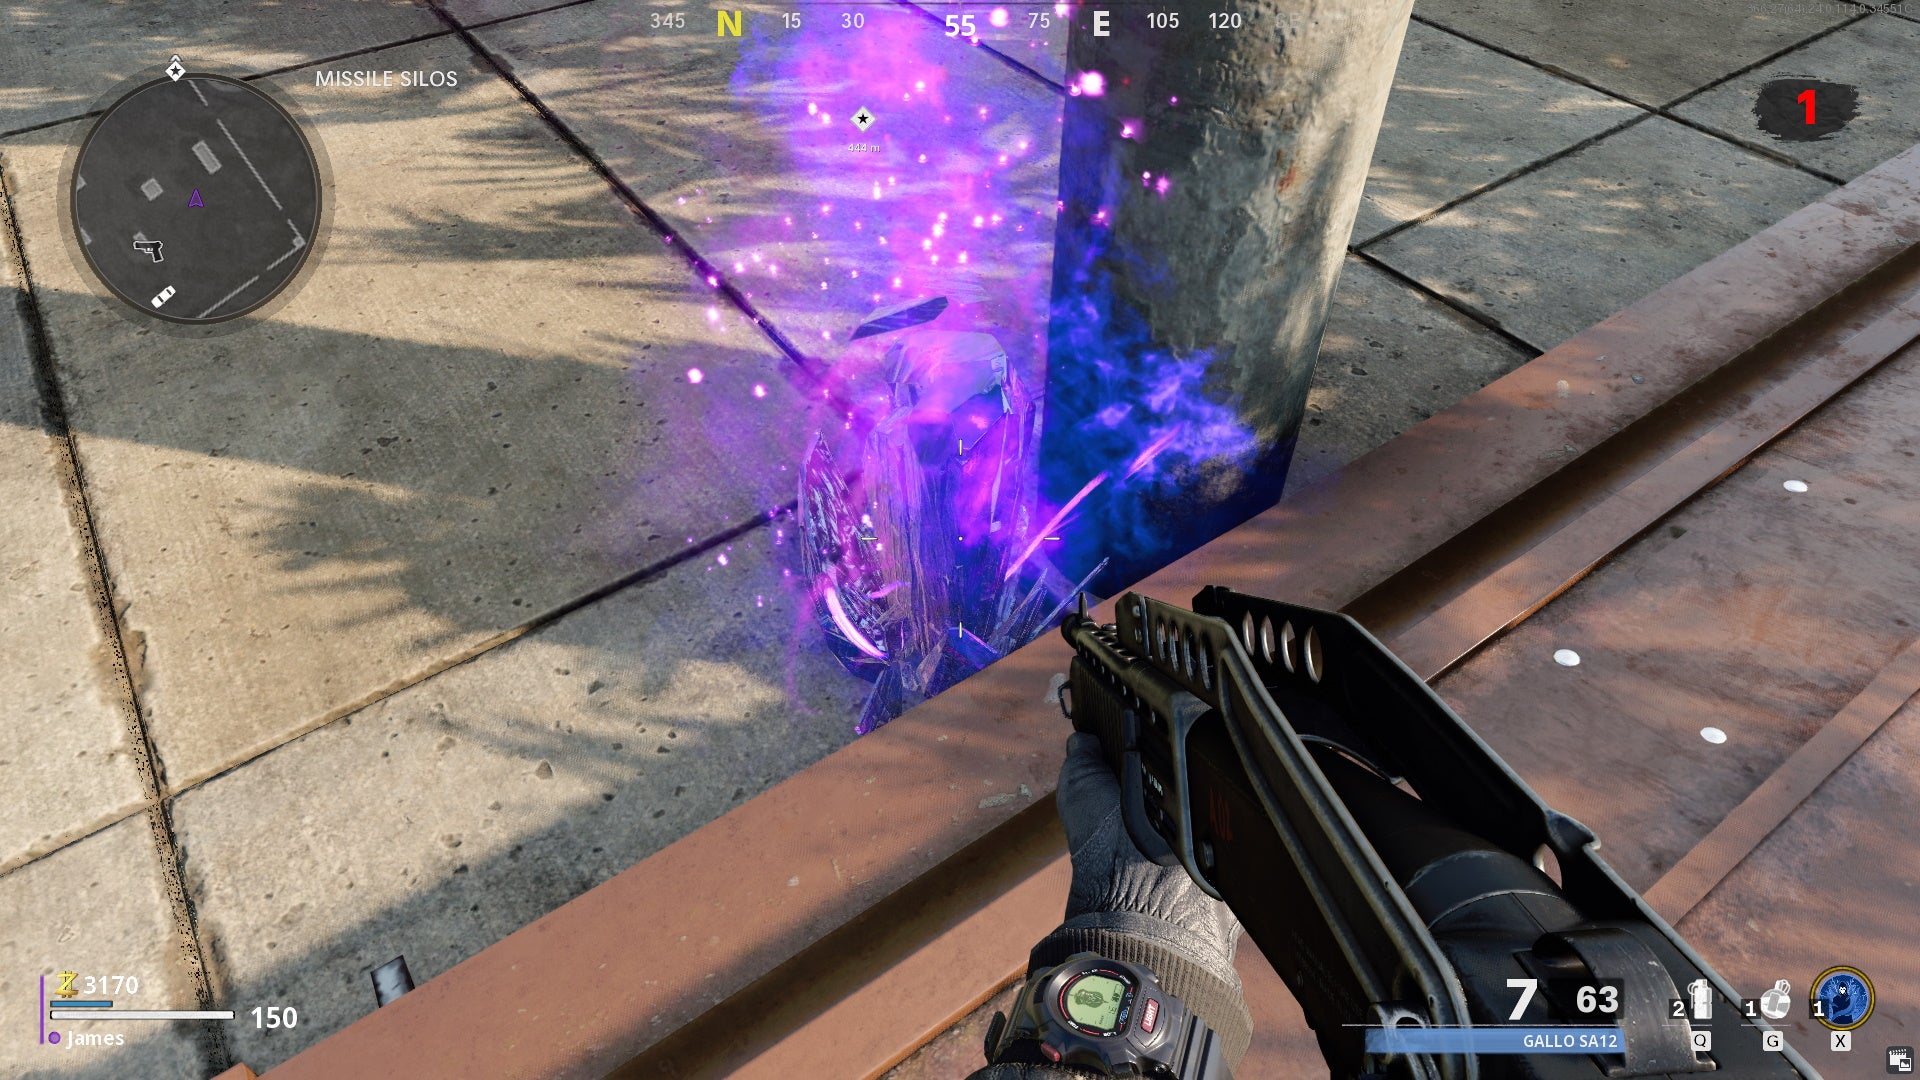 A glowing purple crystal shines in Outbreak mode, and contains rewards if smashed.